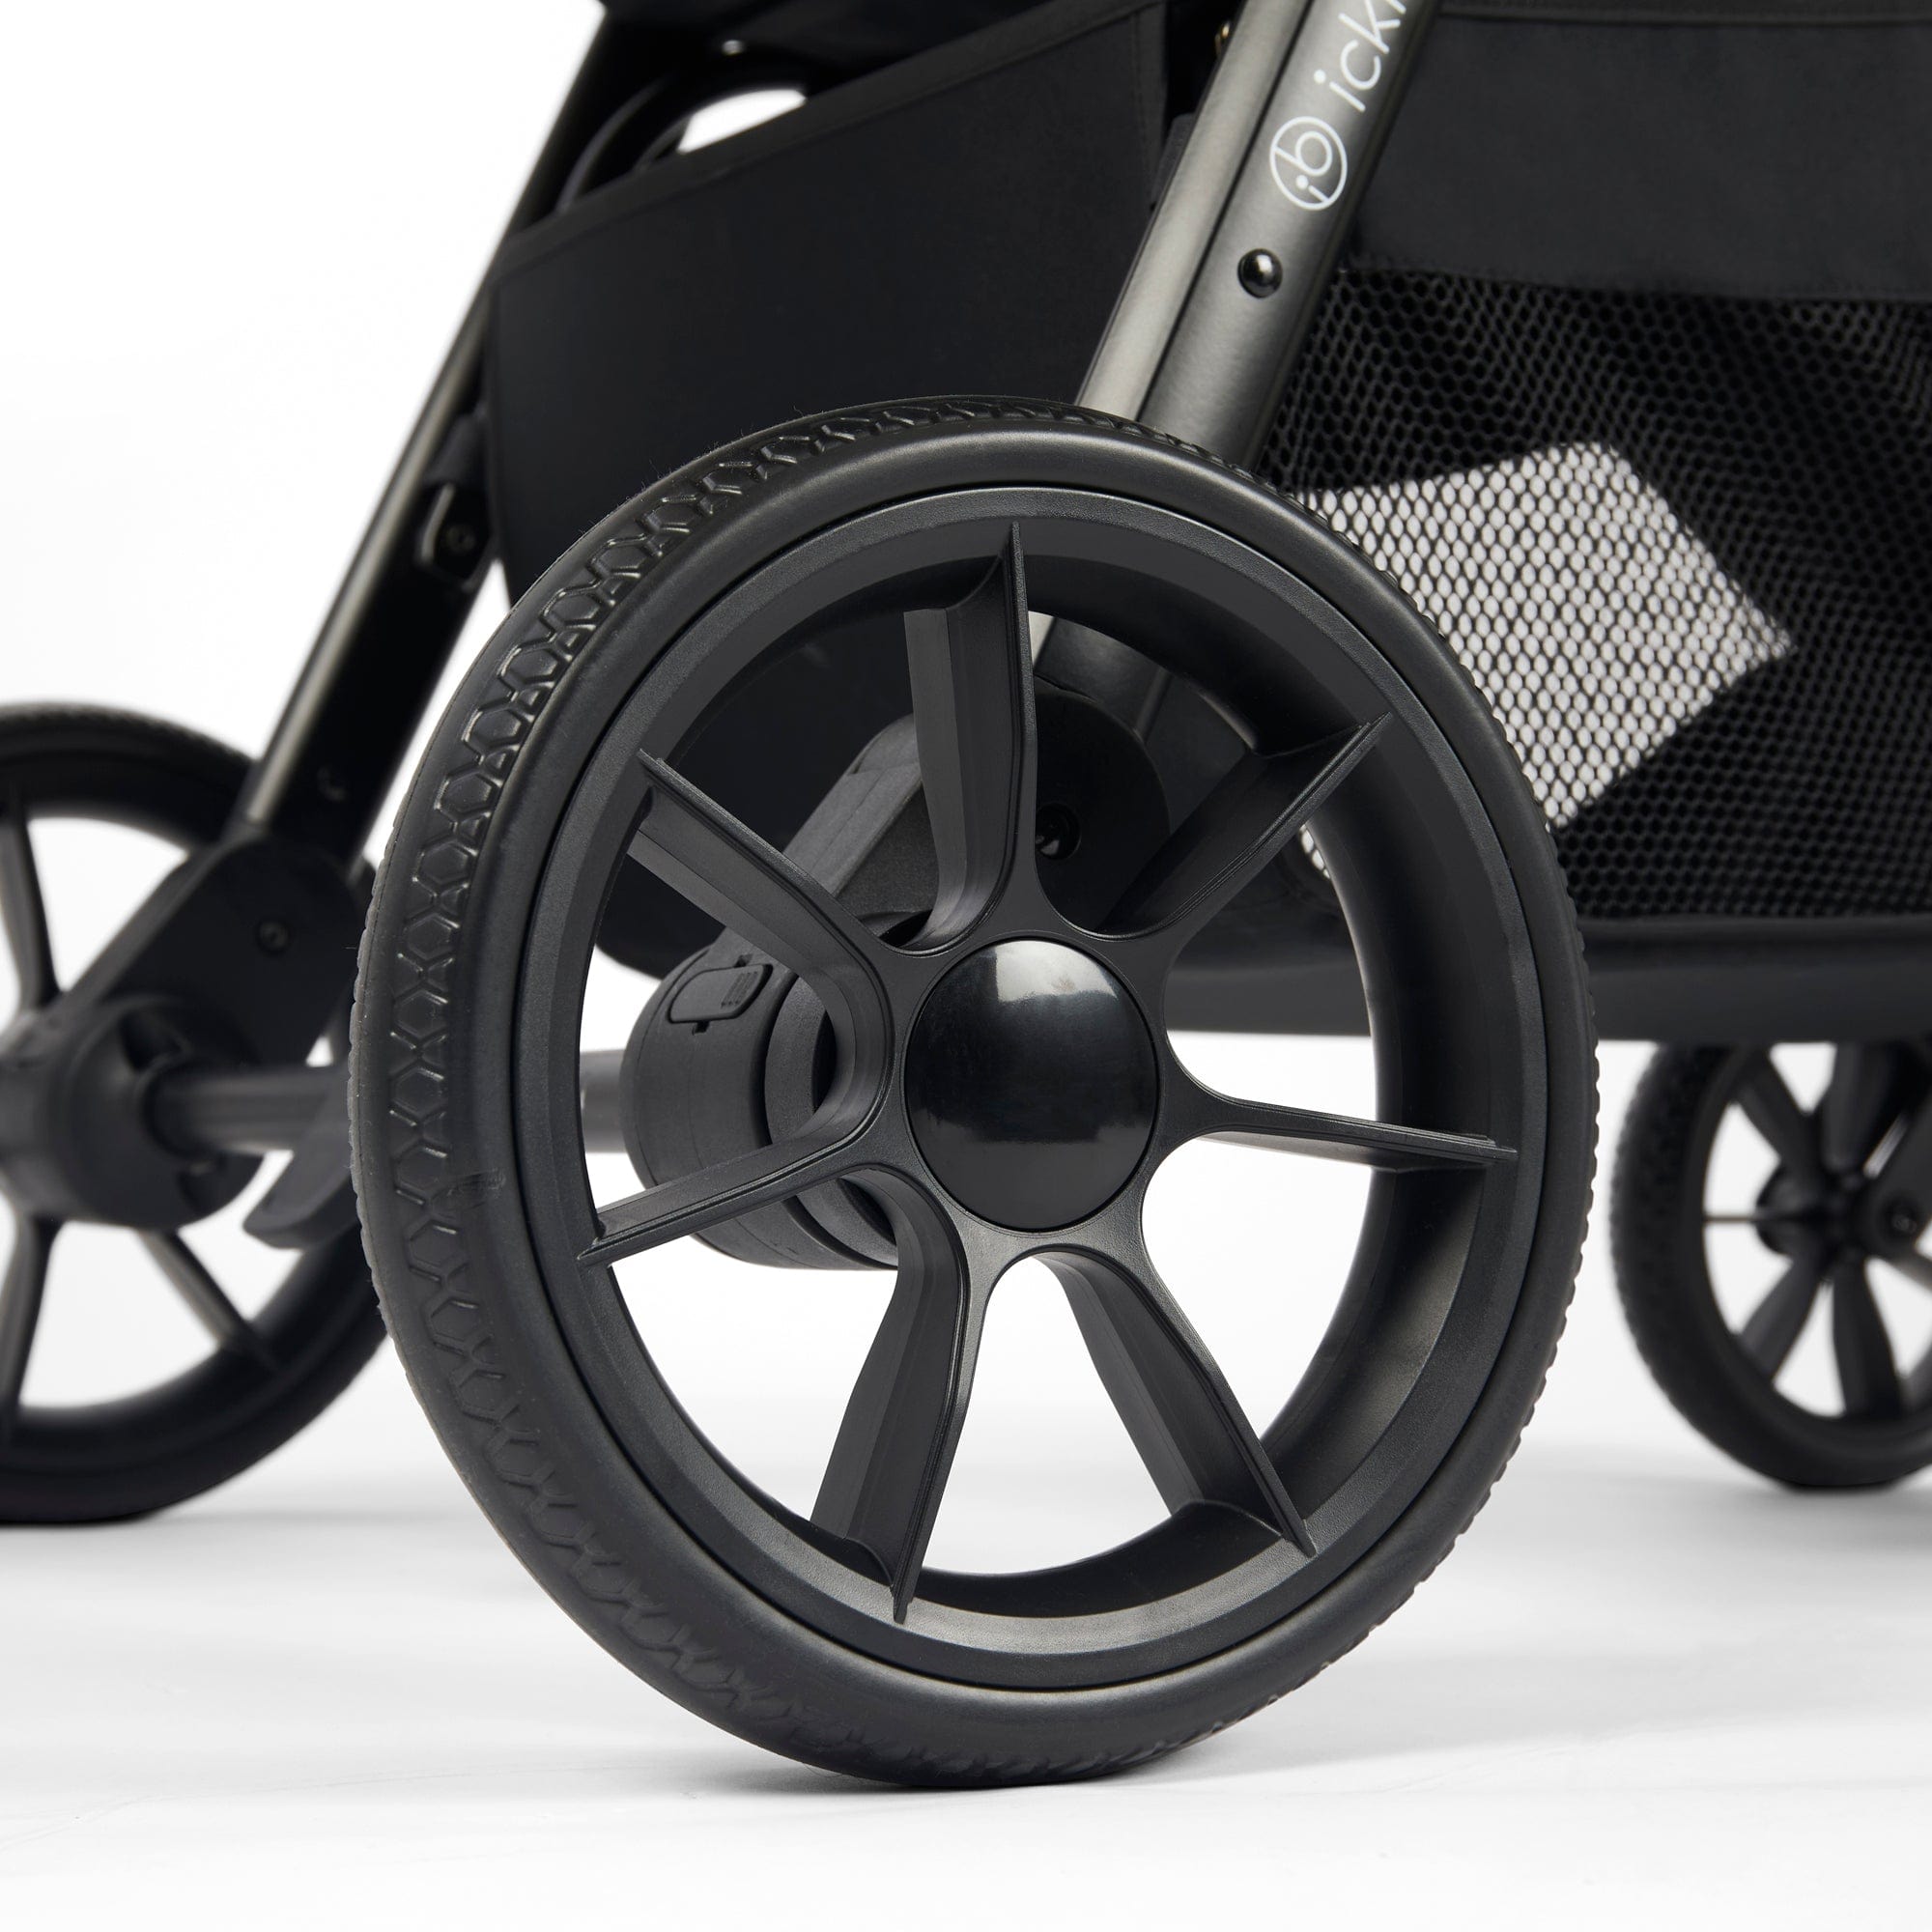 STOMP STRIDE MAX STROLLER in Woodland Pushchairs & Buggies 15-006-200-066 5056515033908